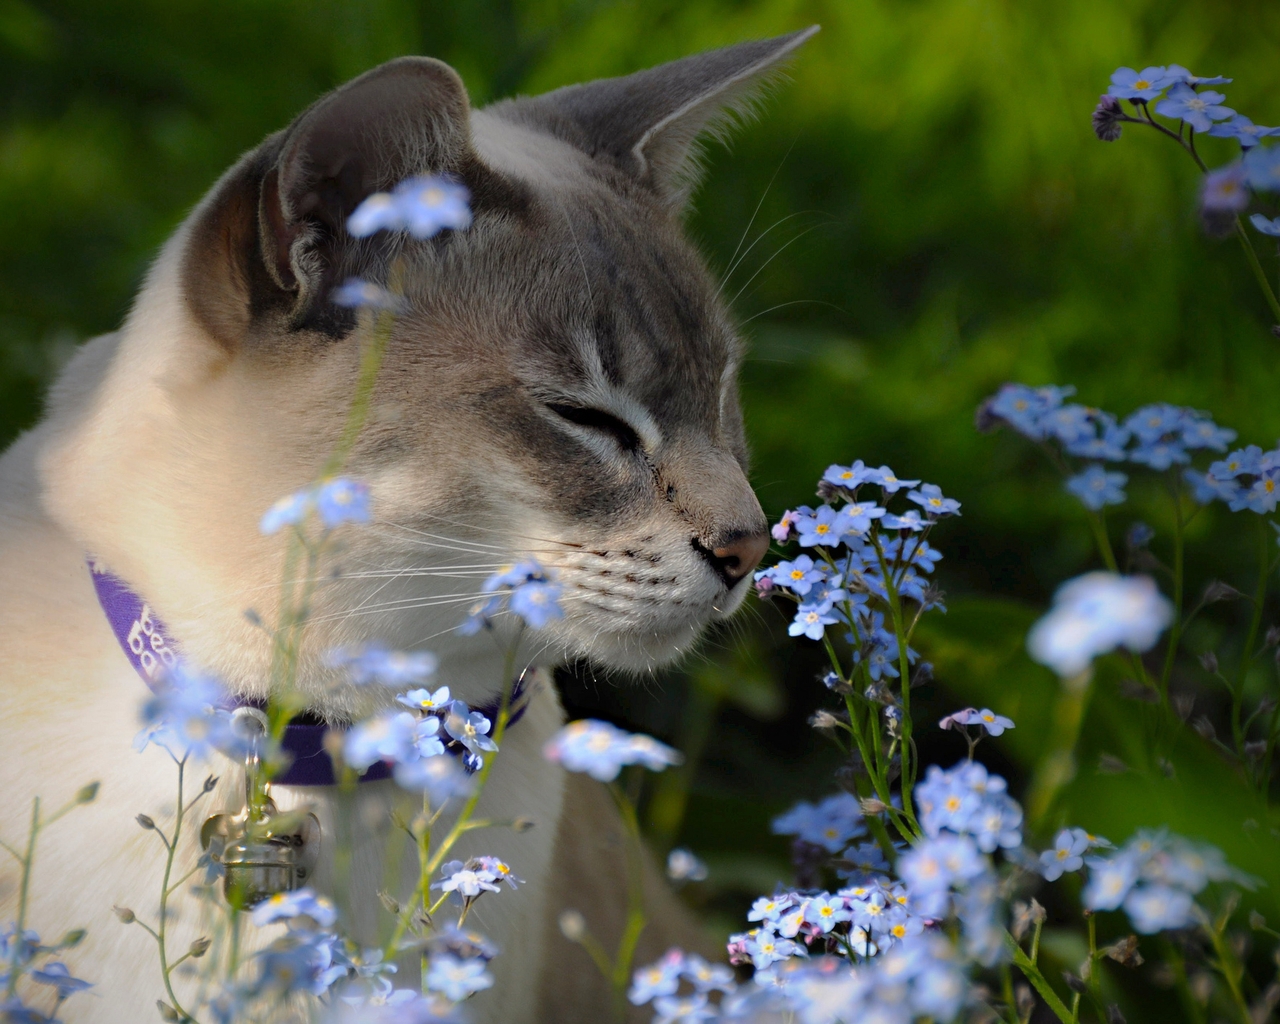 Image: Cat, flowers, field, sniffing, collar